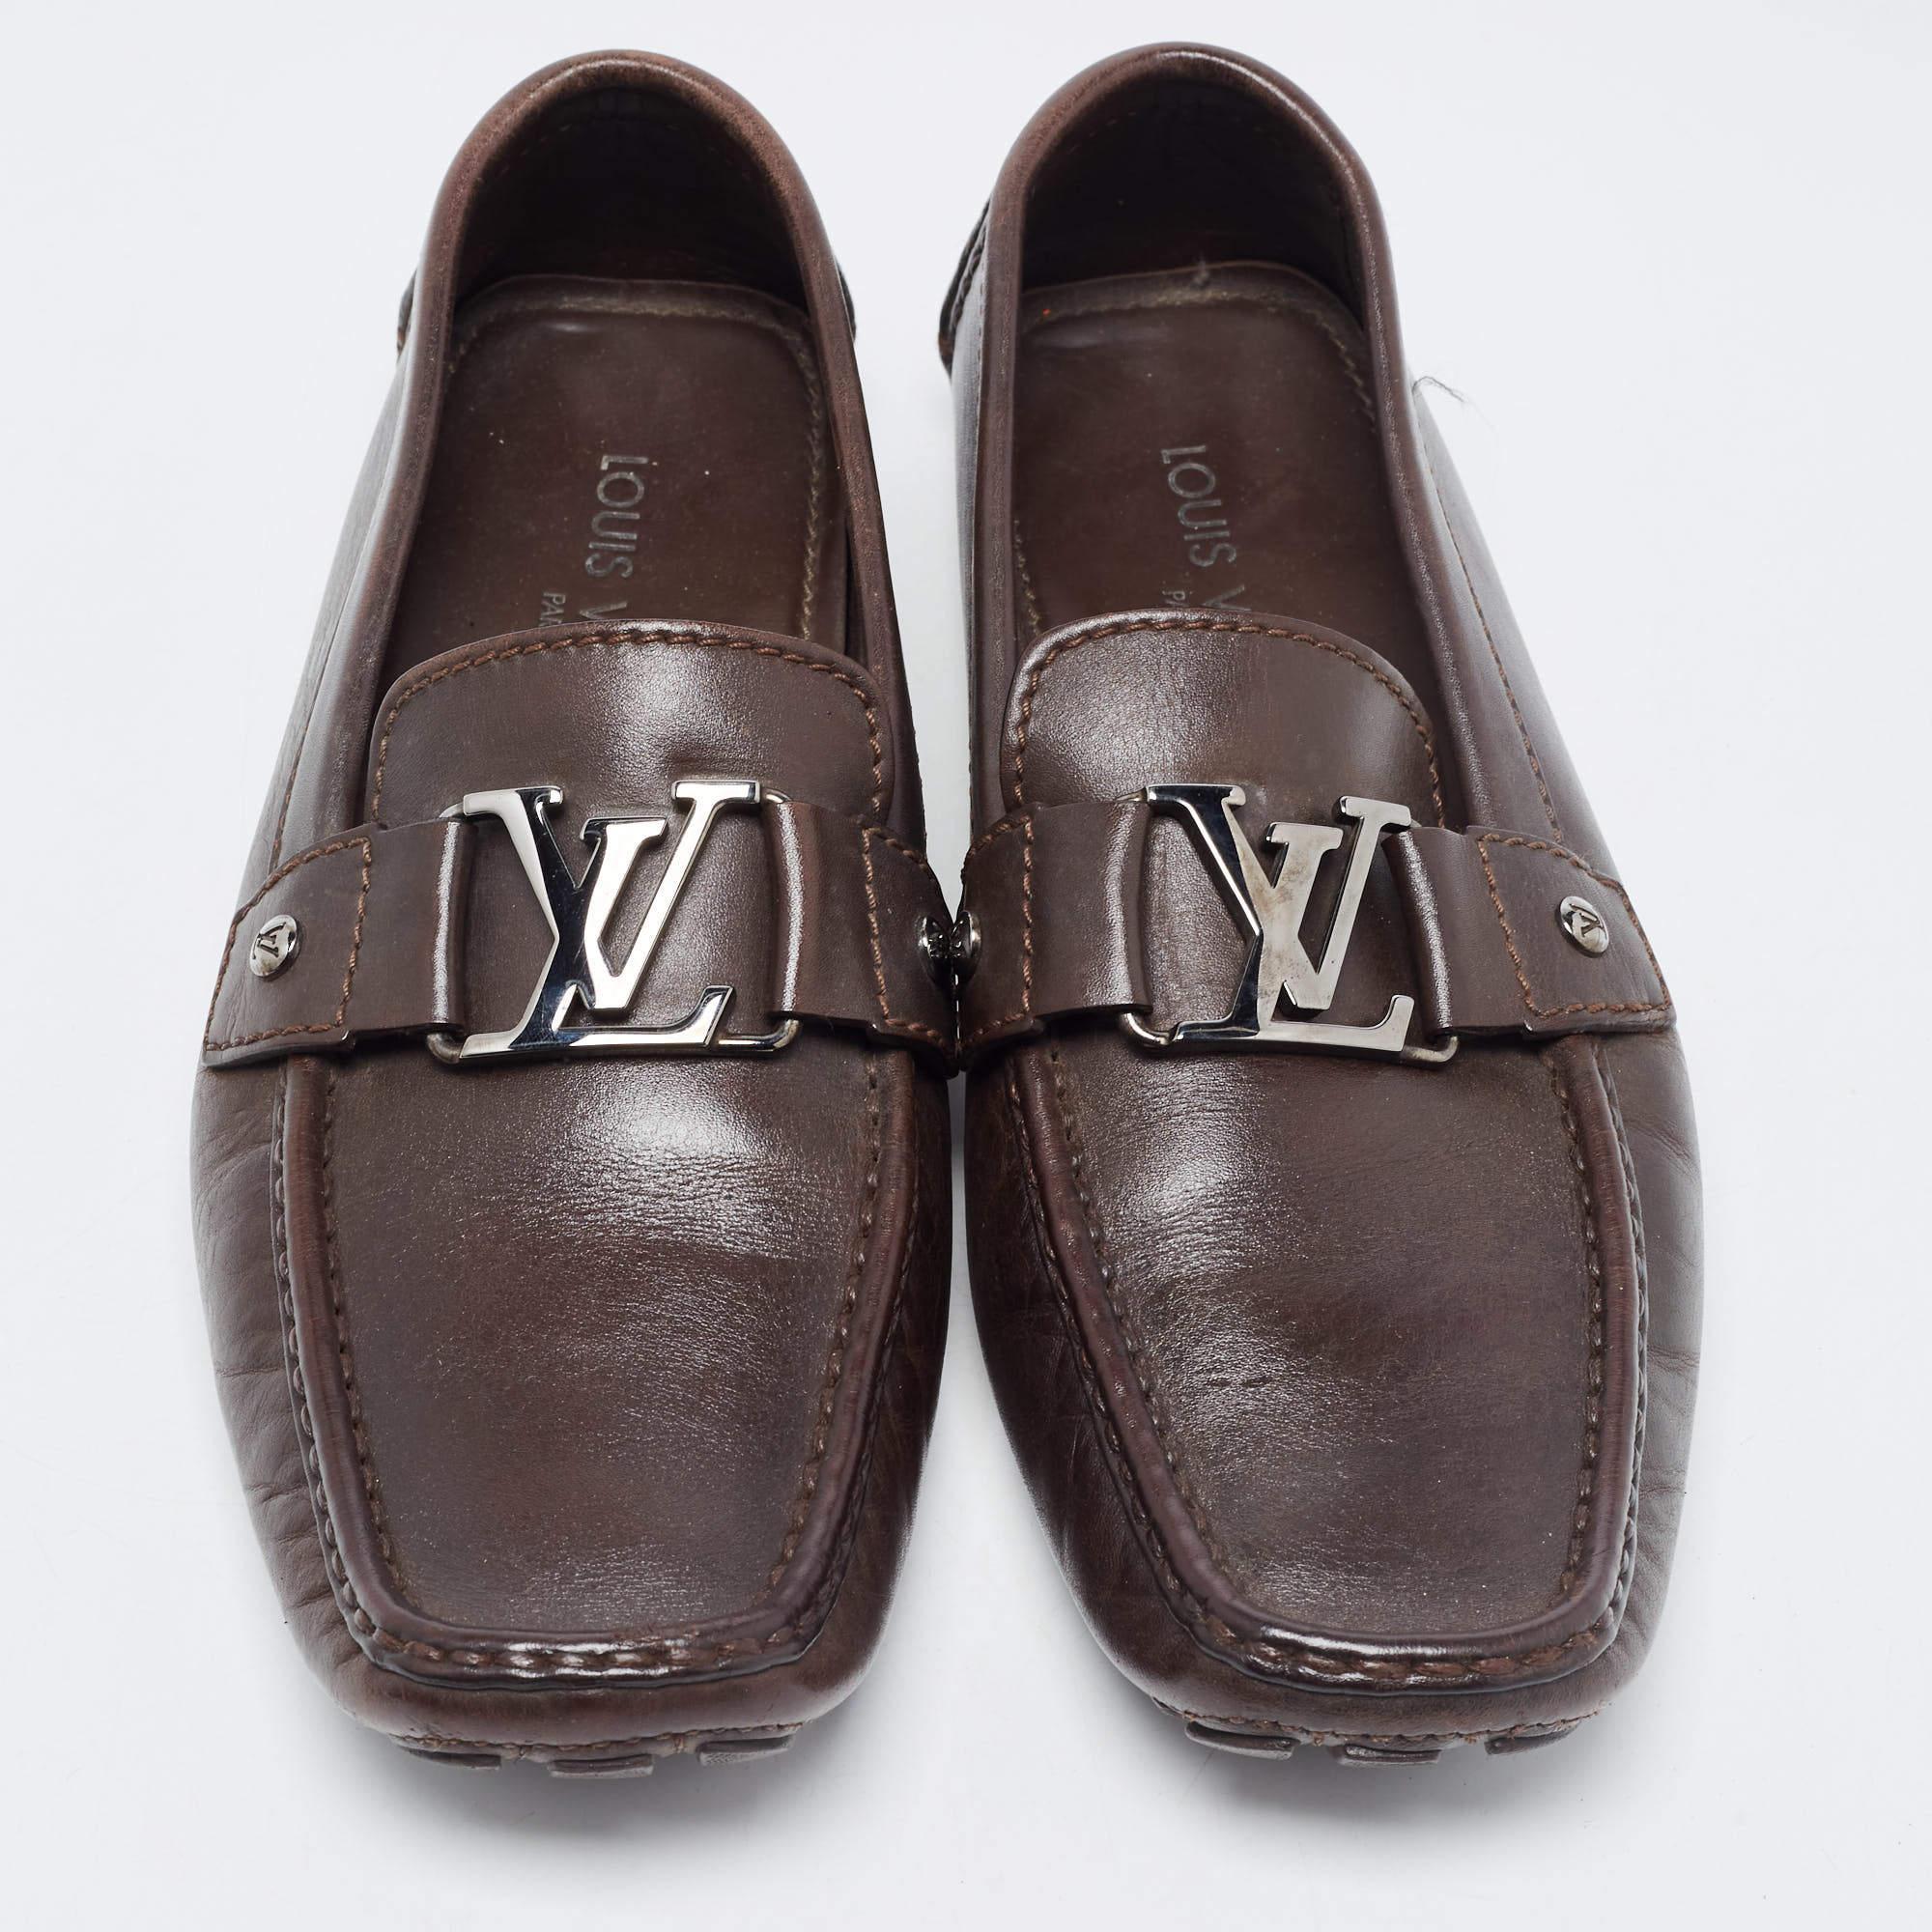 Look sharp and neat with this pair of Monte Carlo loafers from Louis Vuitton. Crafted from brown leather, it is designed with the signature 'LV' on the uppers, and the neat stitching details make it durable. These shoes are characterized by